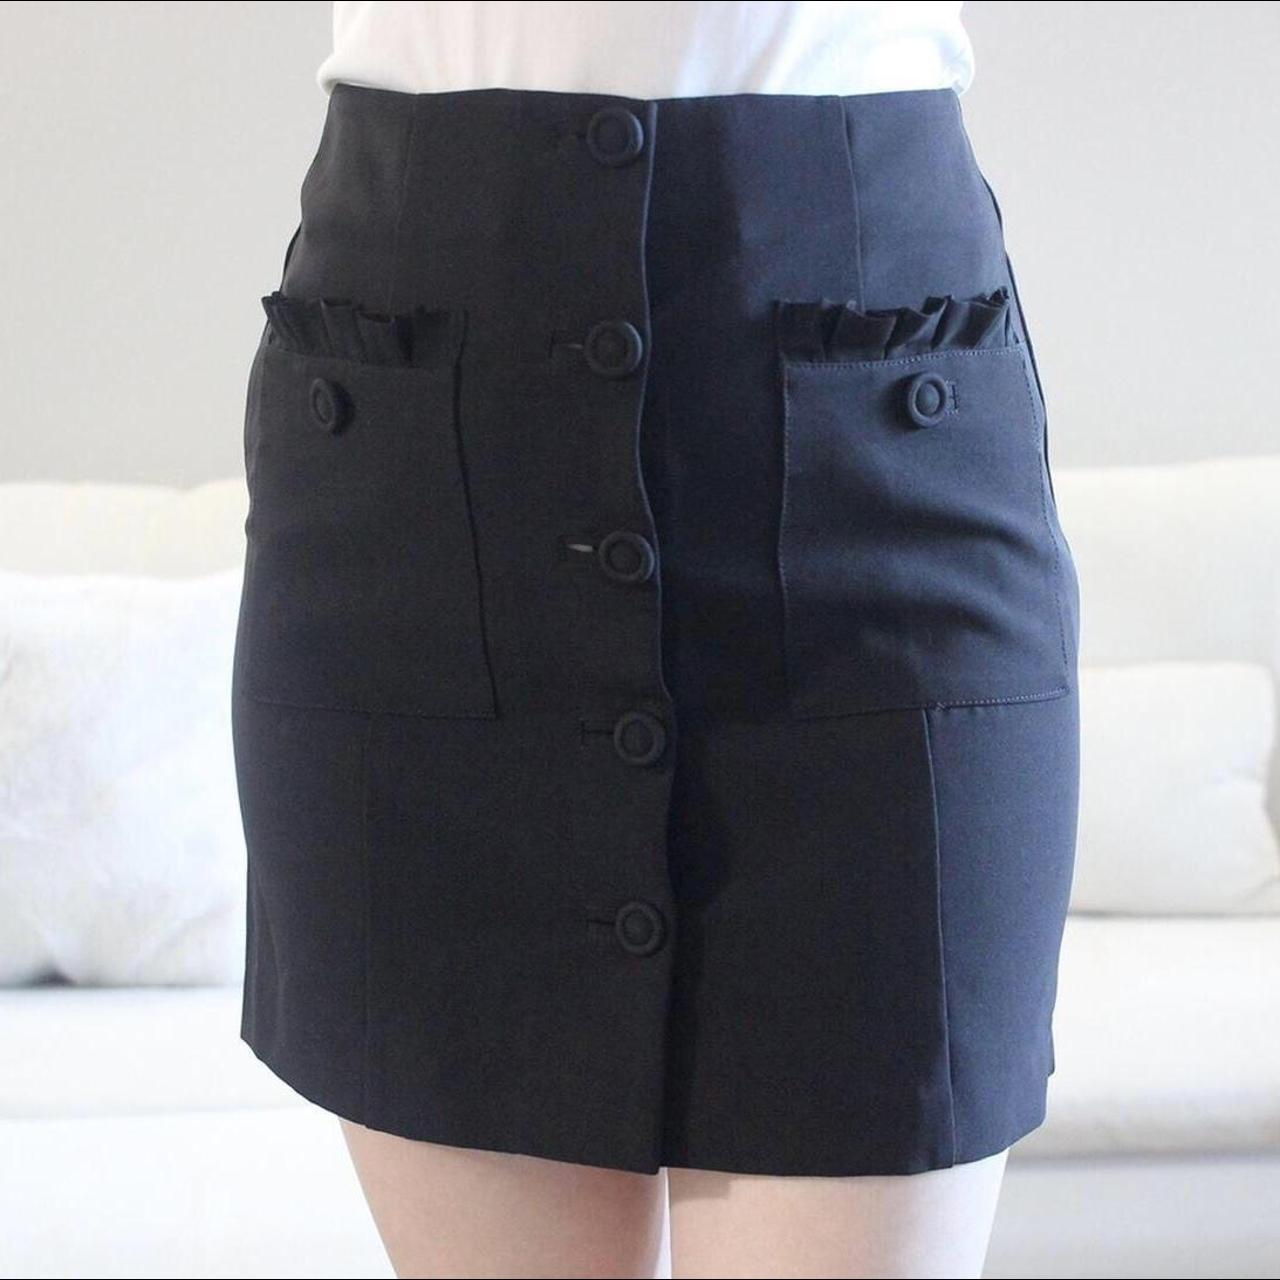 Product Image 1 - Lovers + Friends skirt 🍓

Brand